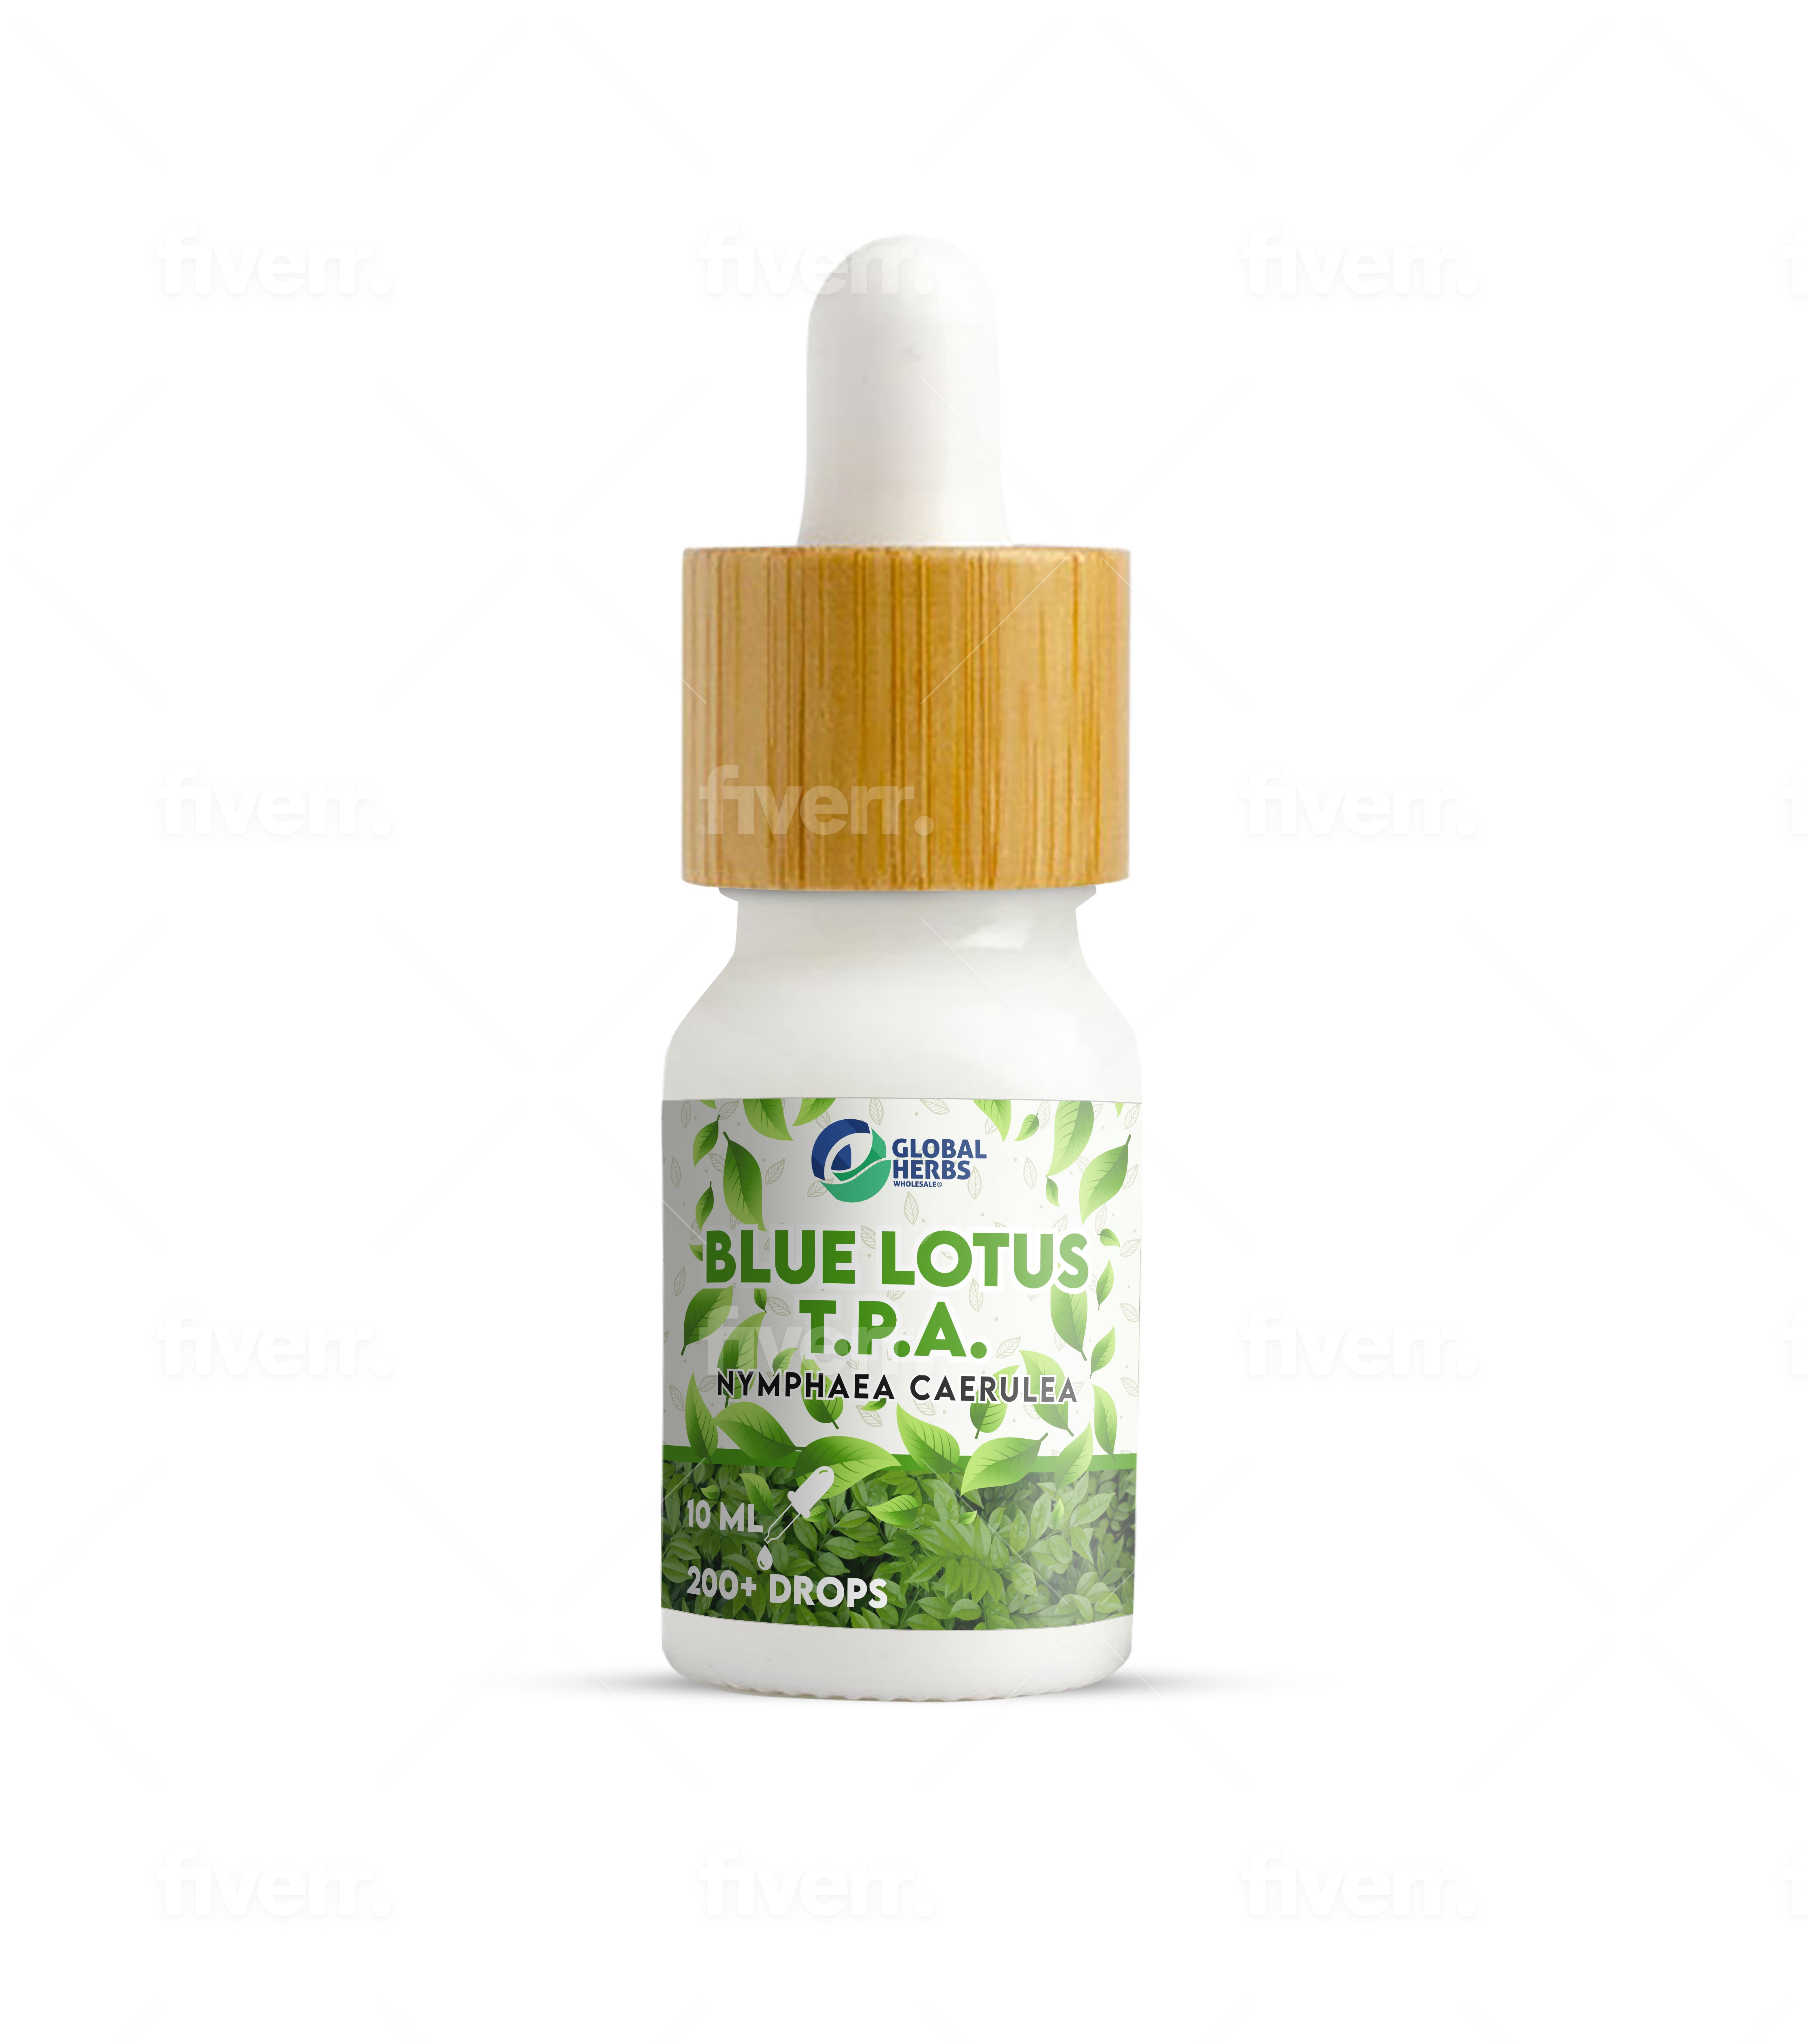 Blue lotus alkaloide extract